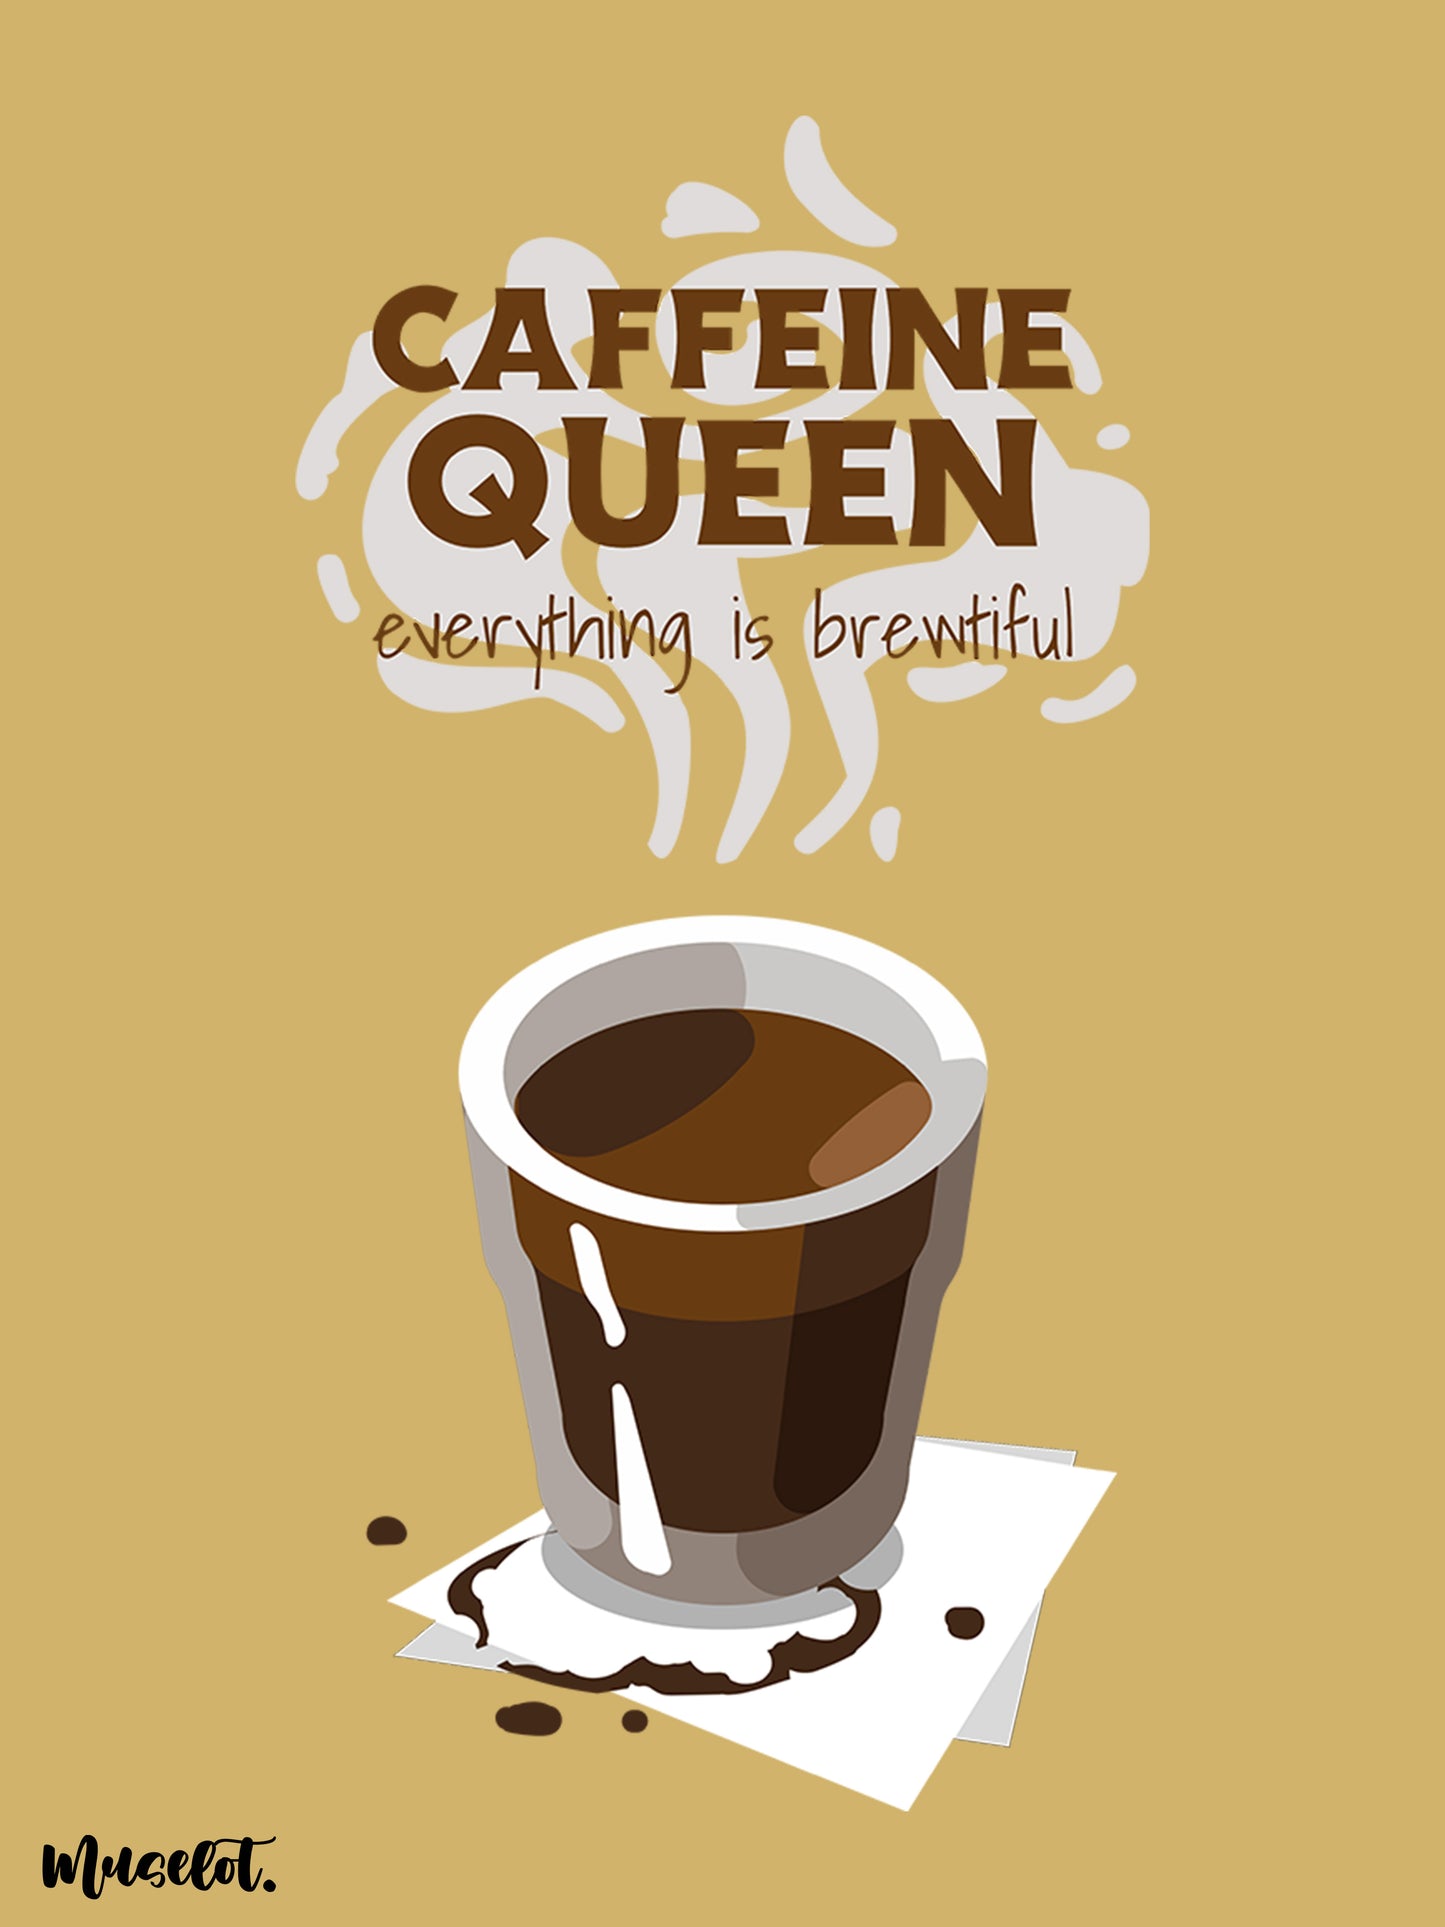 Caffeine queen, everything is brewtiful printed phone cases for coffee lovers 